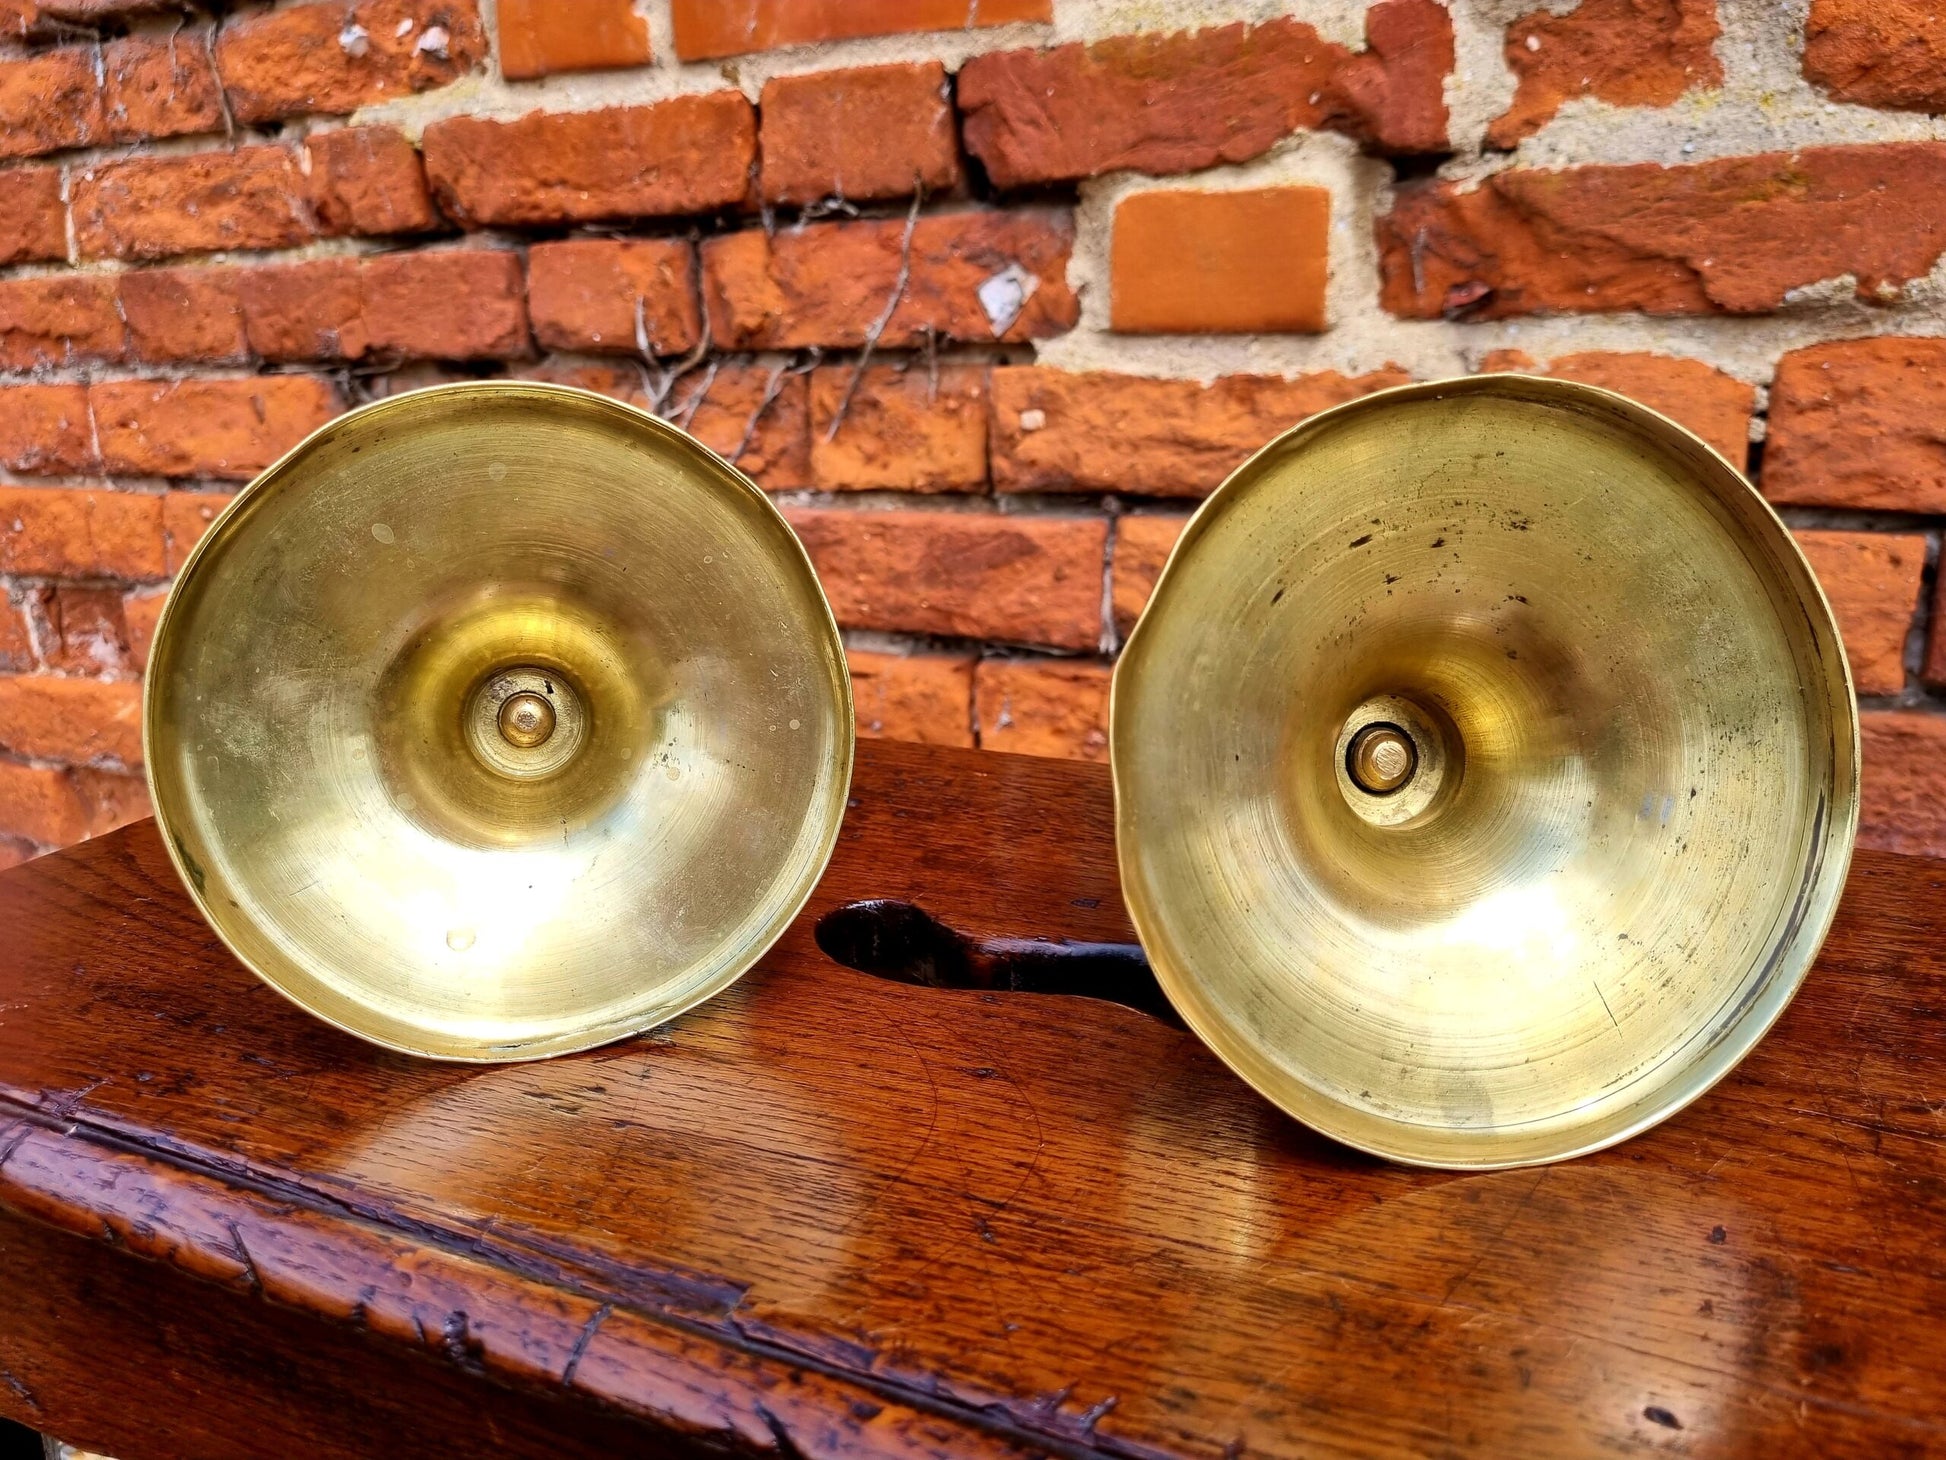 Antique 19th Century English Bronze 'Push-Up' Candlesticks, a Pair —  East2West Furniture